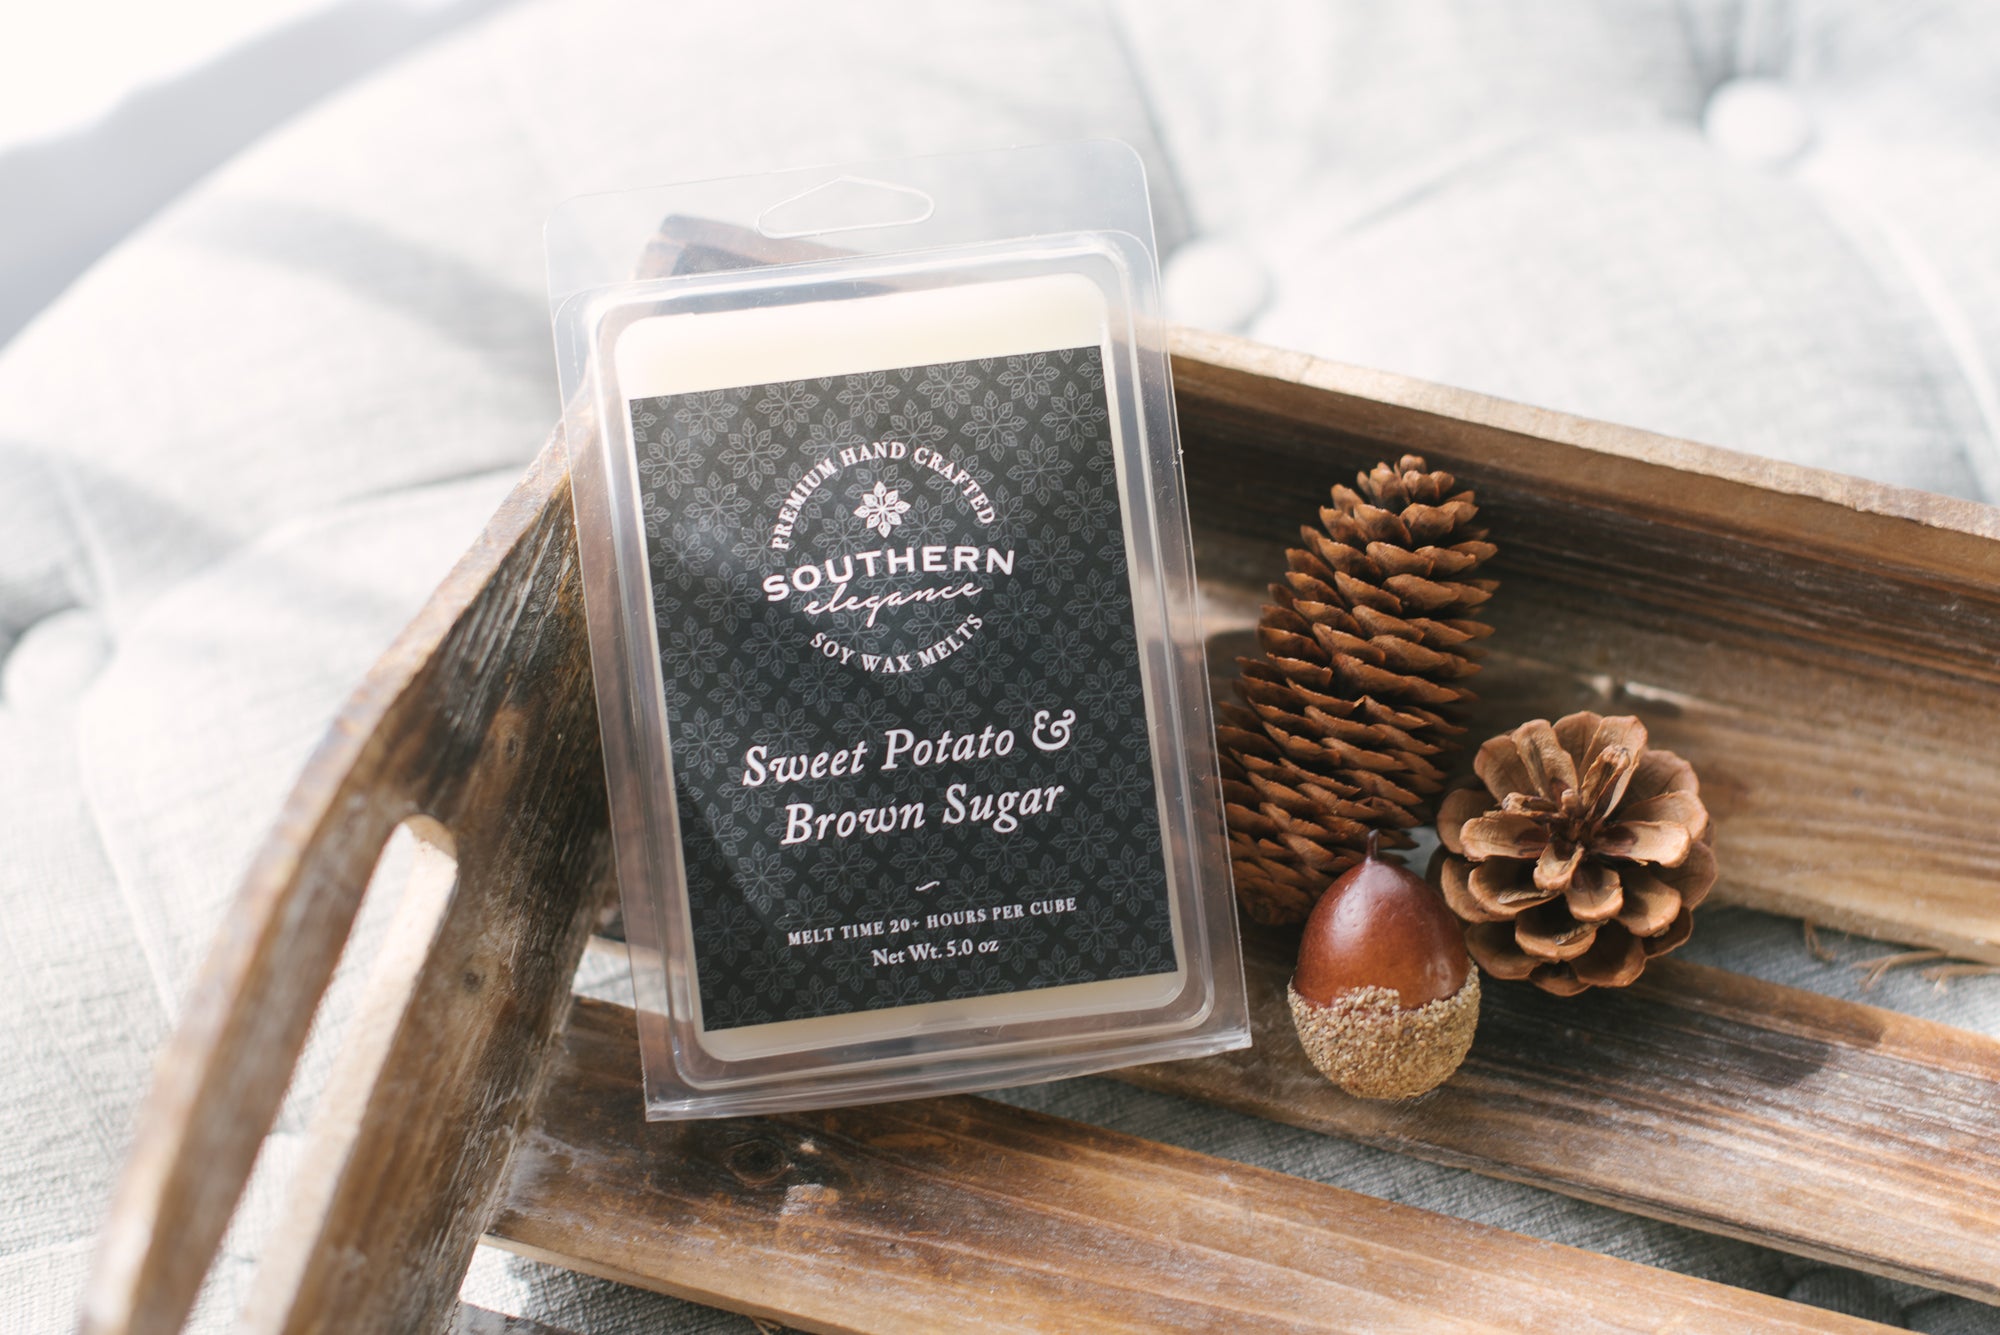 Sweet Southern Scentsation Trio: Creme Brulee, Coffee and Vanilla -  Southern Elegance